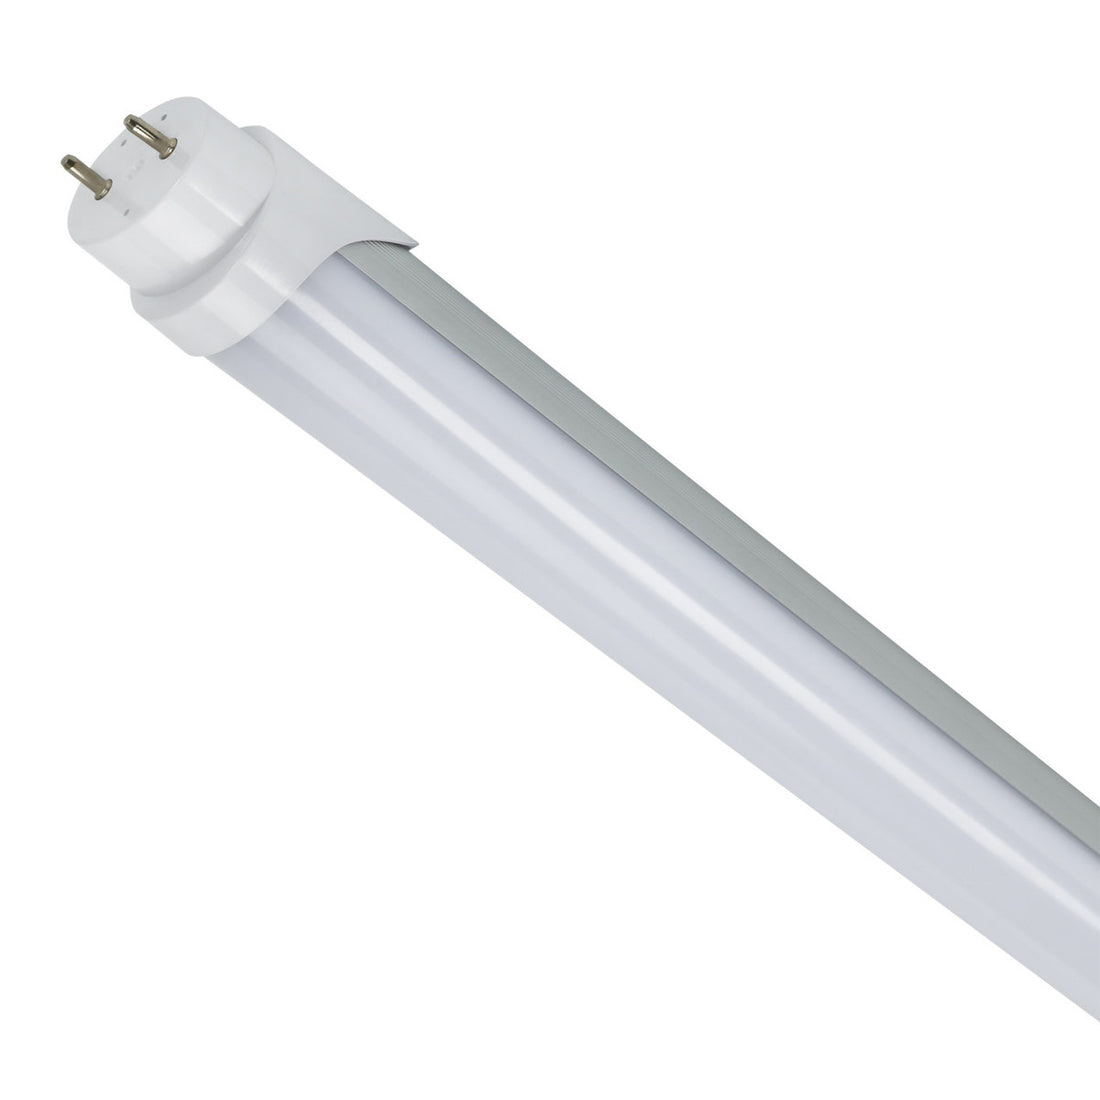 LED Tube Light - 12W - 5000K 100-277VAC,Dual-Mode, Non-Dimming, Oval Aluminum Housing, Frosted Lens - 30 Pack